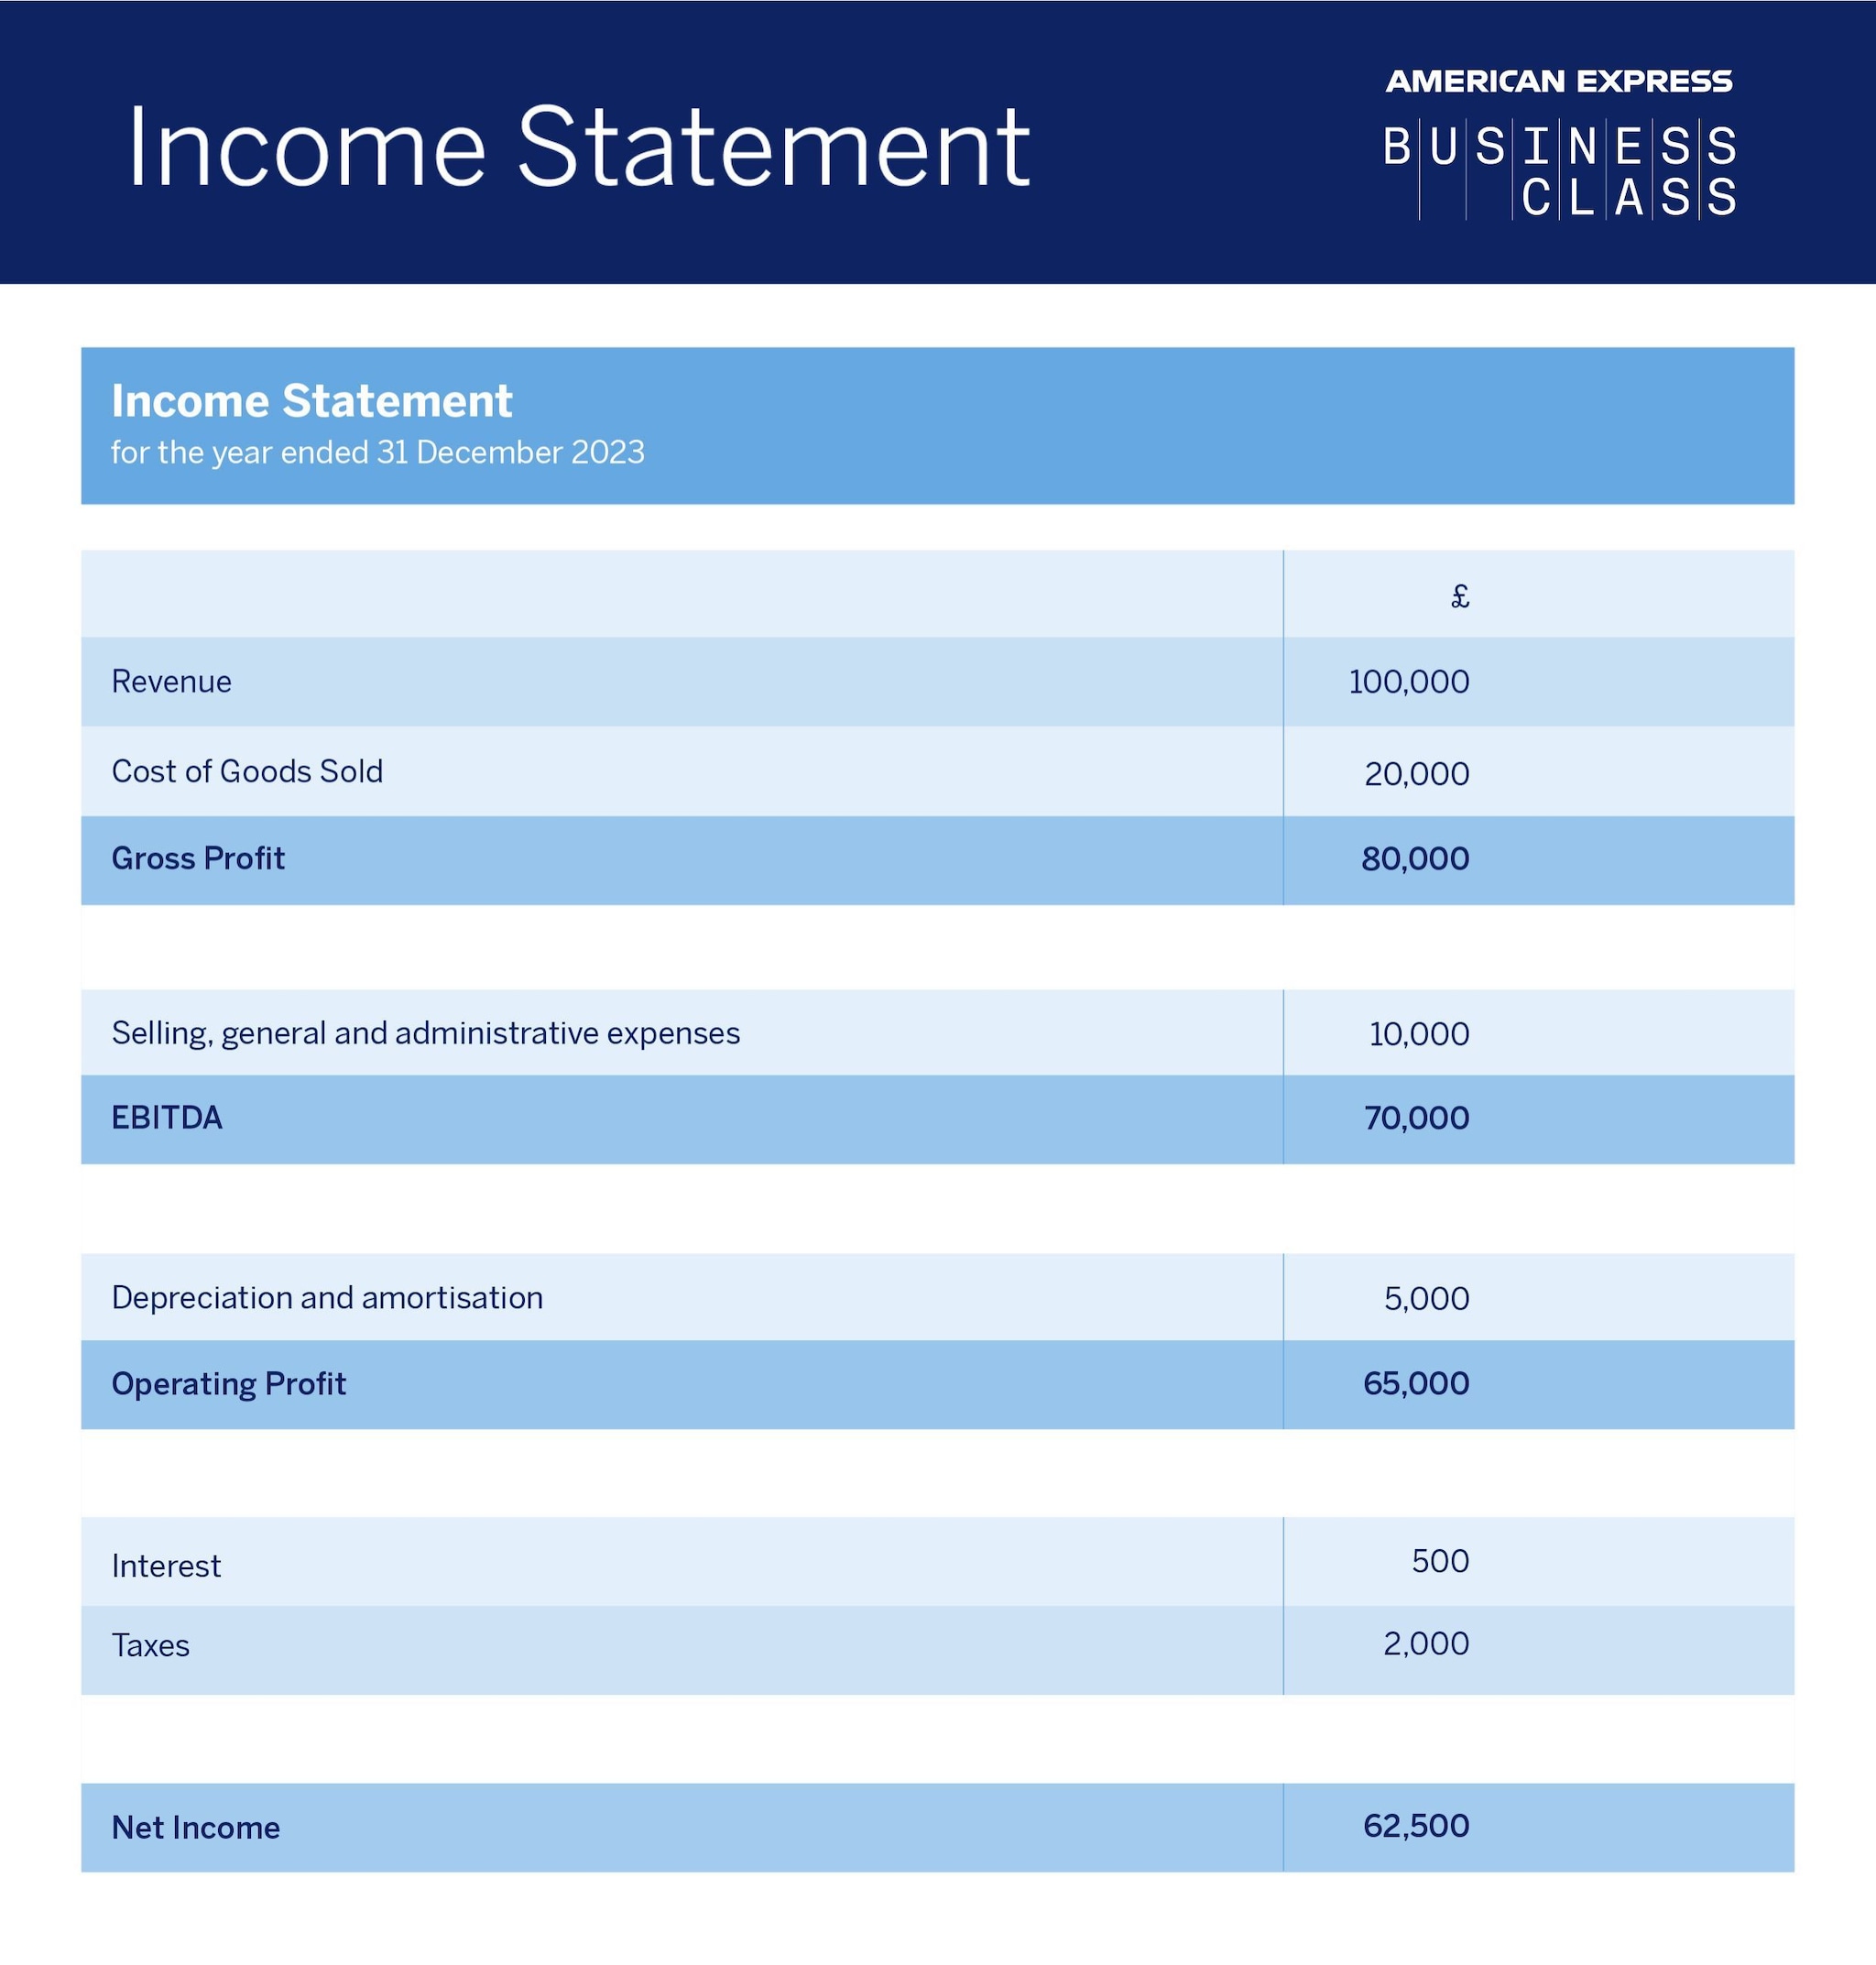 american-express-income-statement-graphic - 1